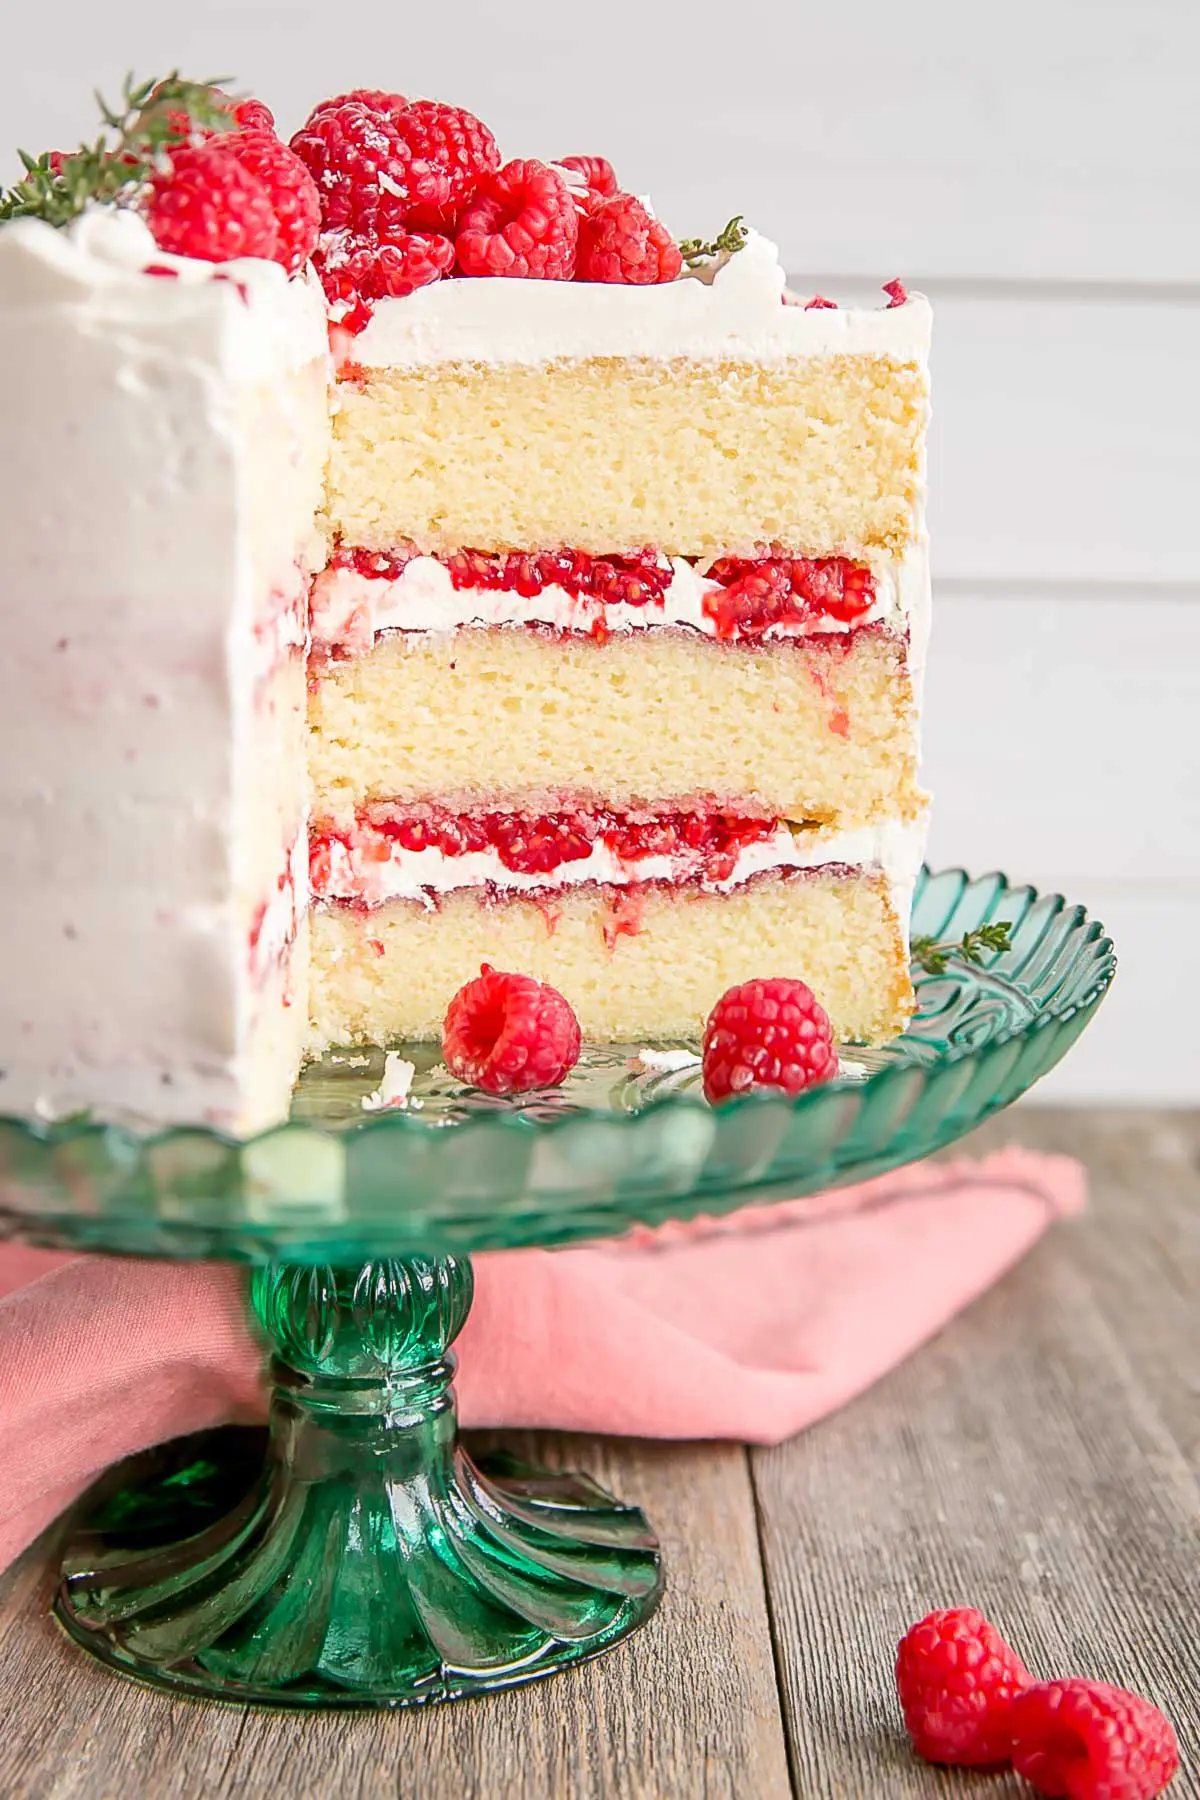 White Chocolate Raspberry Truffle Cake - Toronto Online Cake Ordering –  Cakeforyou.ca - Online Birthday Cake, Cheesecake and Corporate Cake  Catering. Delivery in Toronto Canada